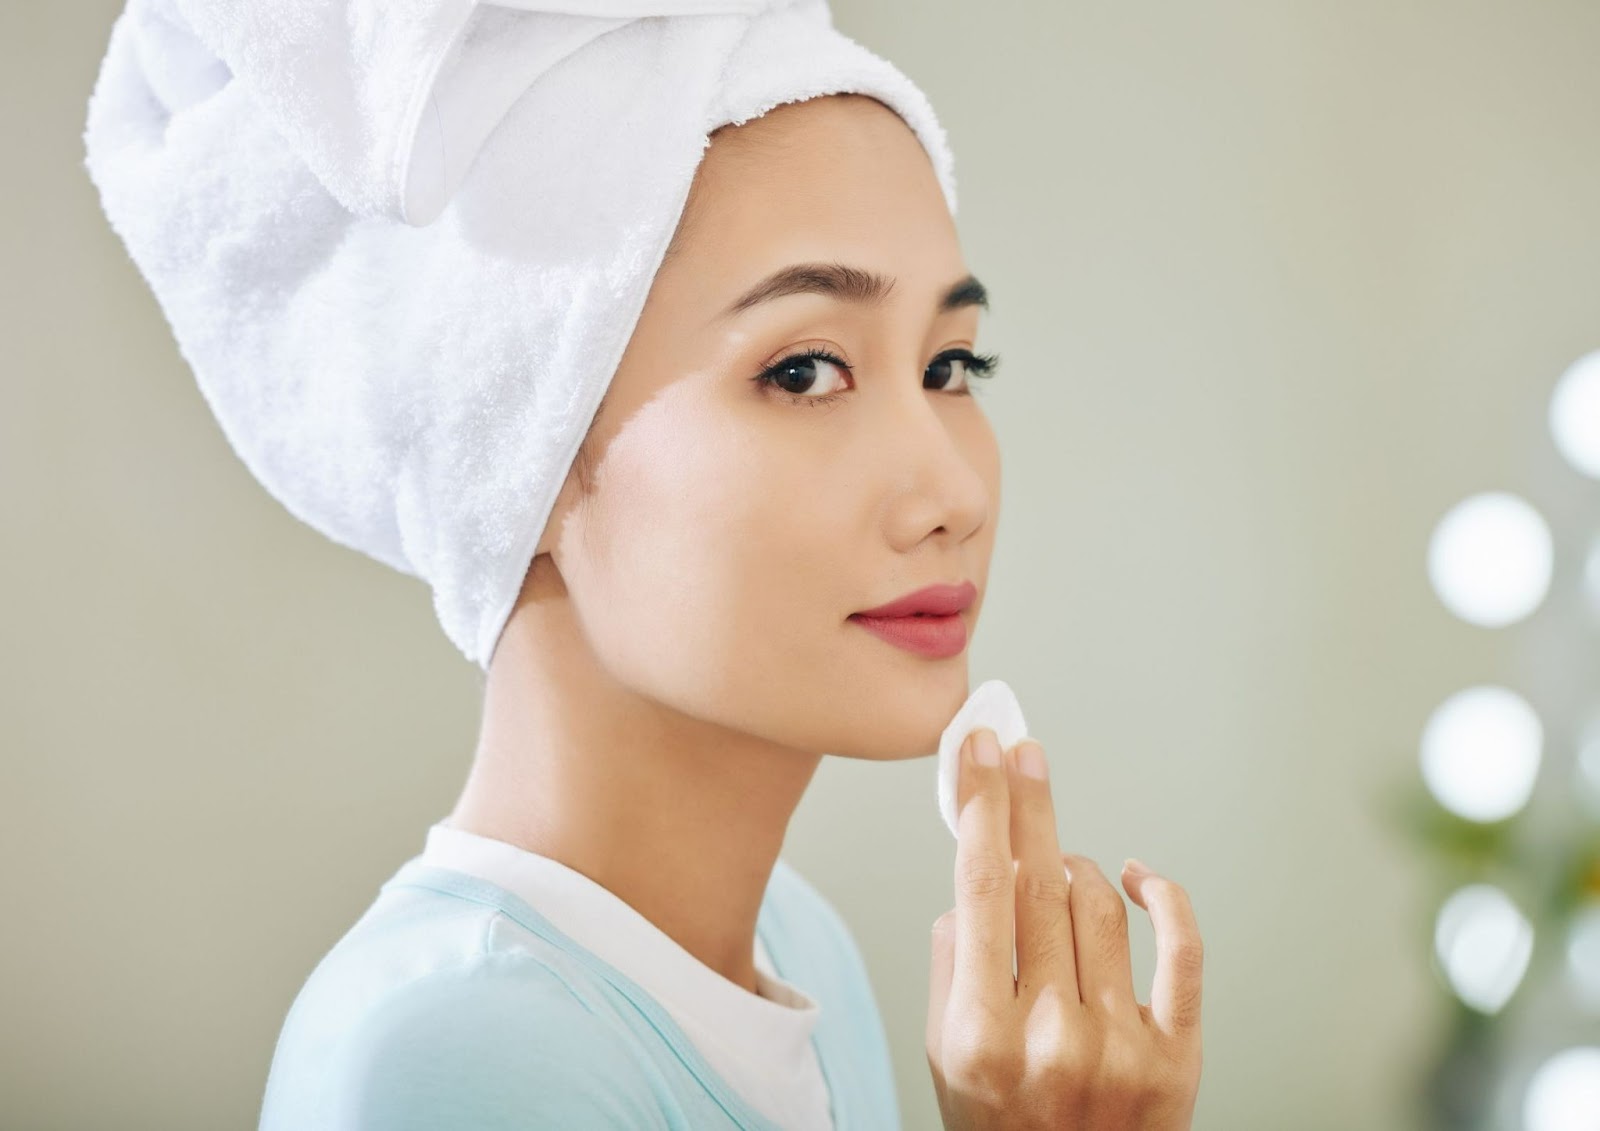 A toner refreshes your skin, while retaining skin moisture.